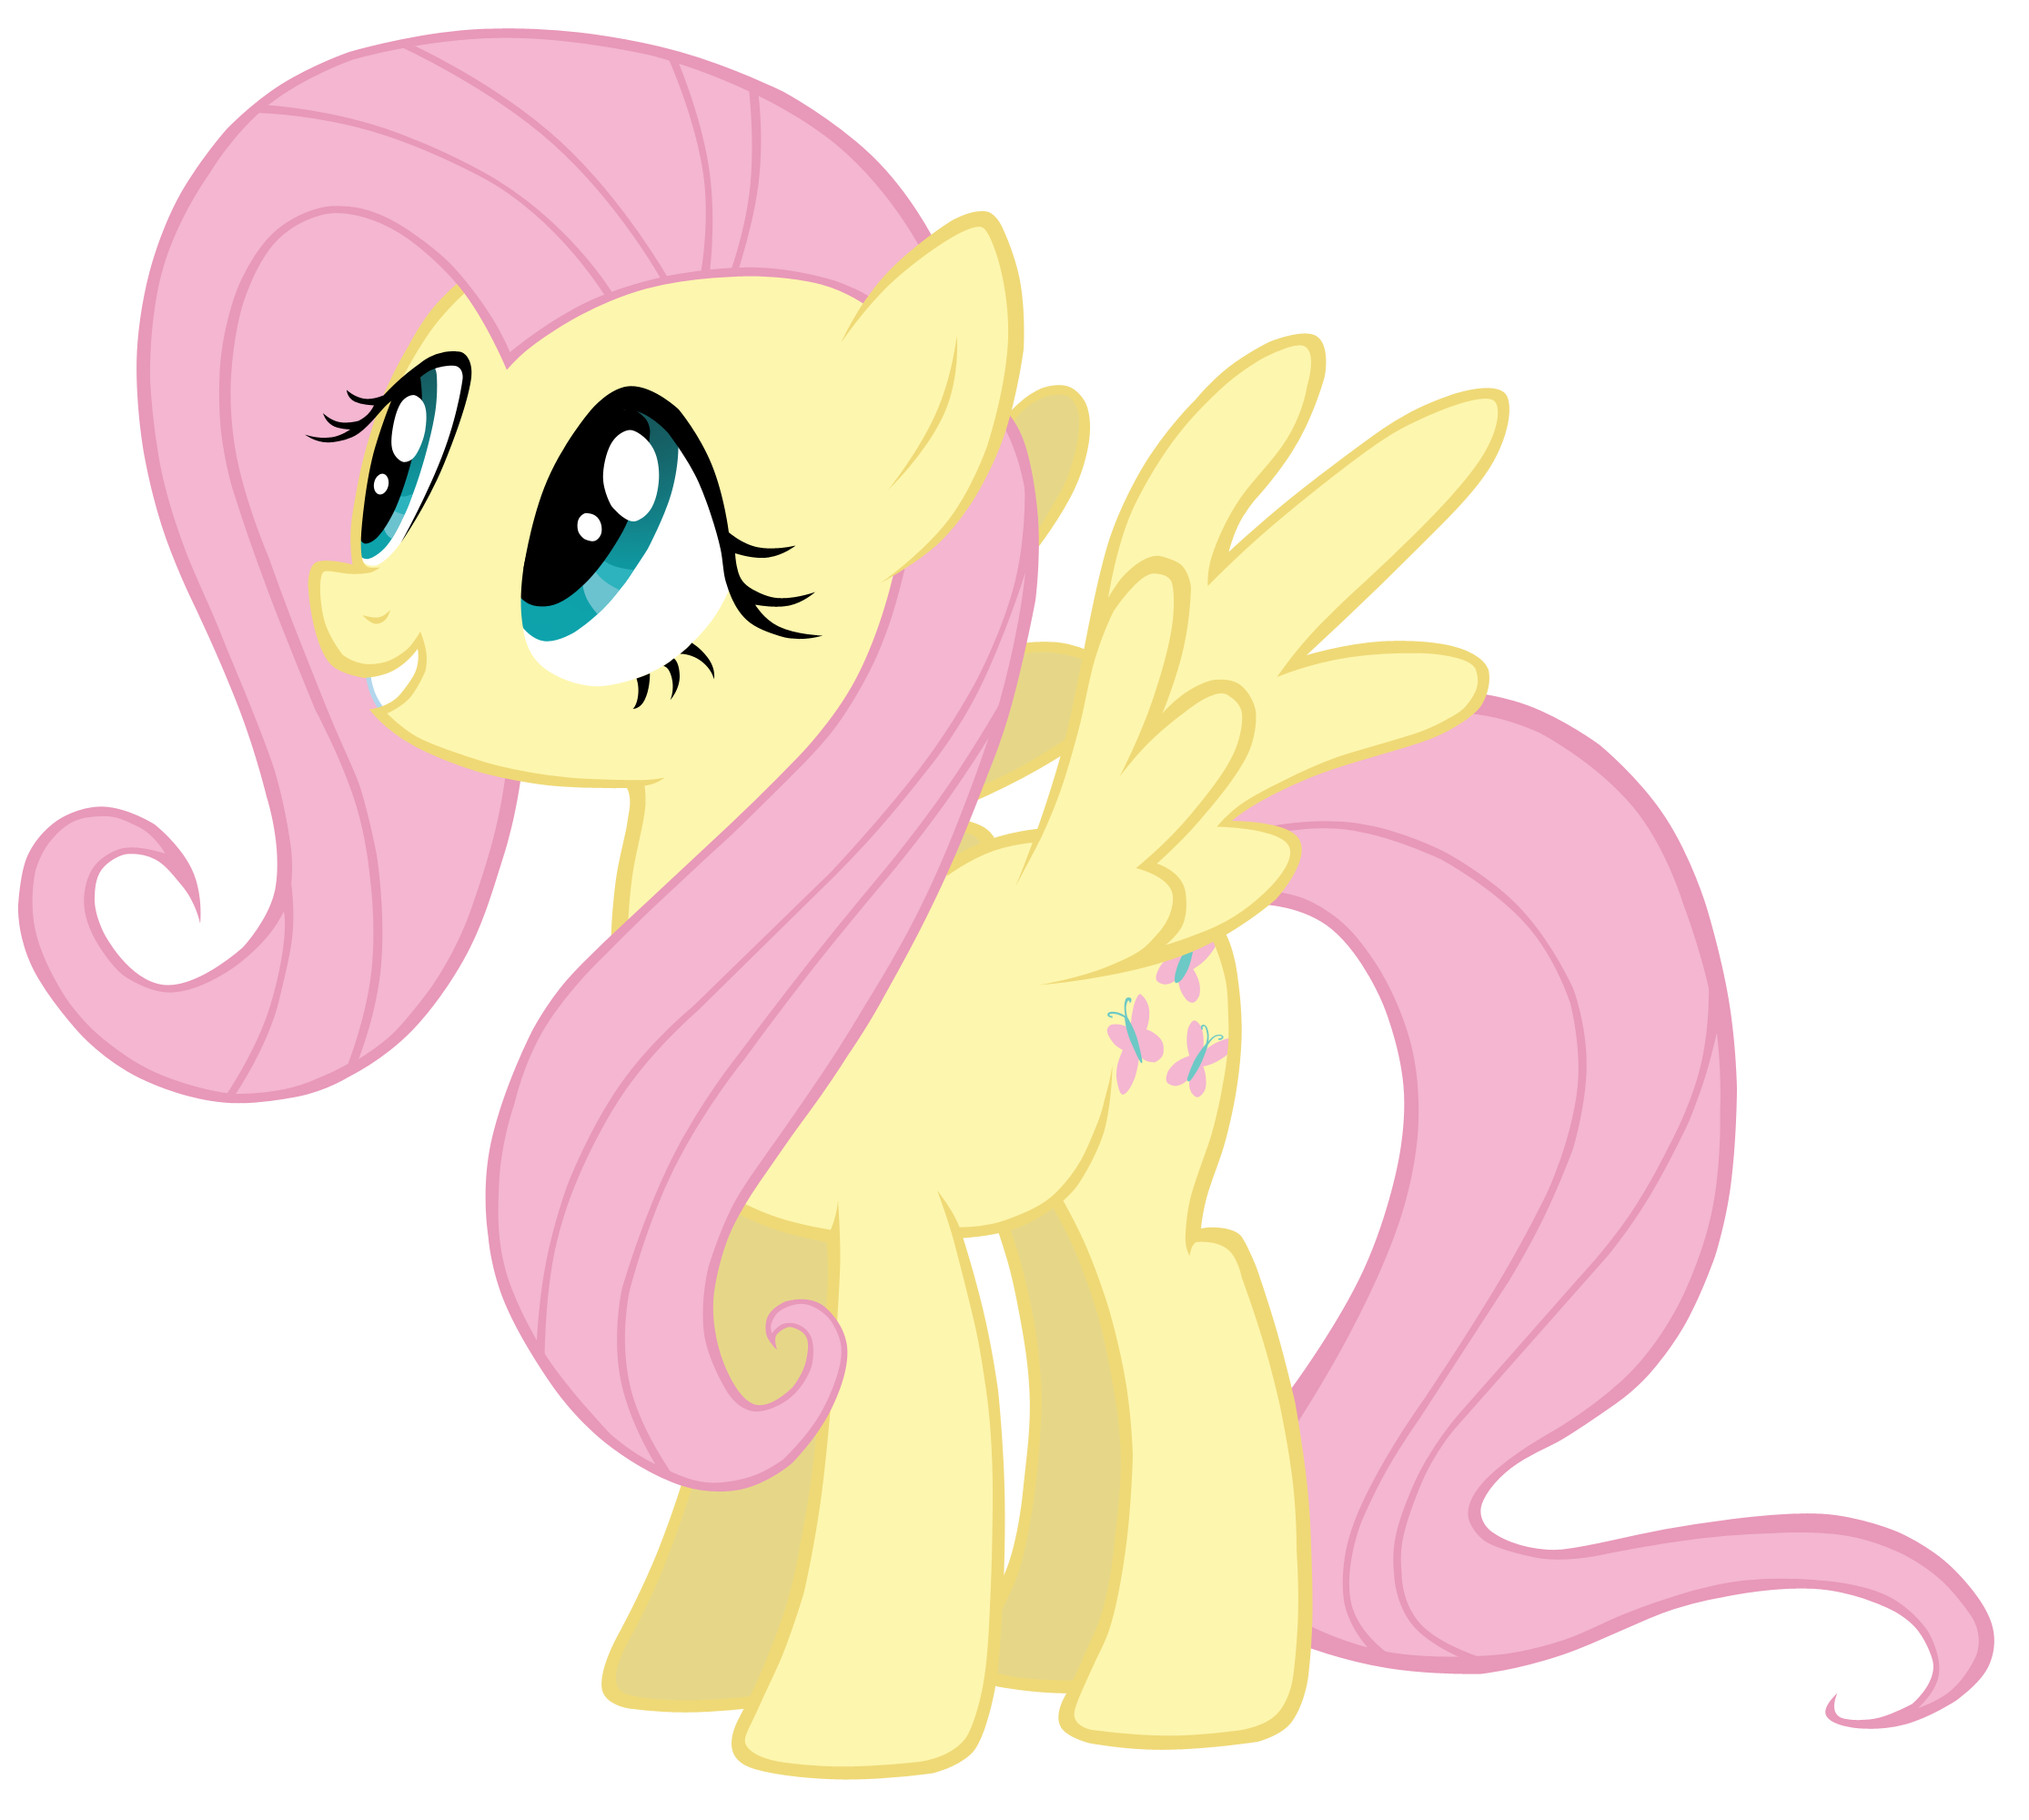 fluttershy_by_makintosh91-d4phooo.png